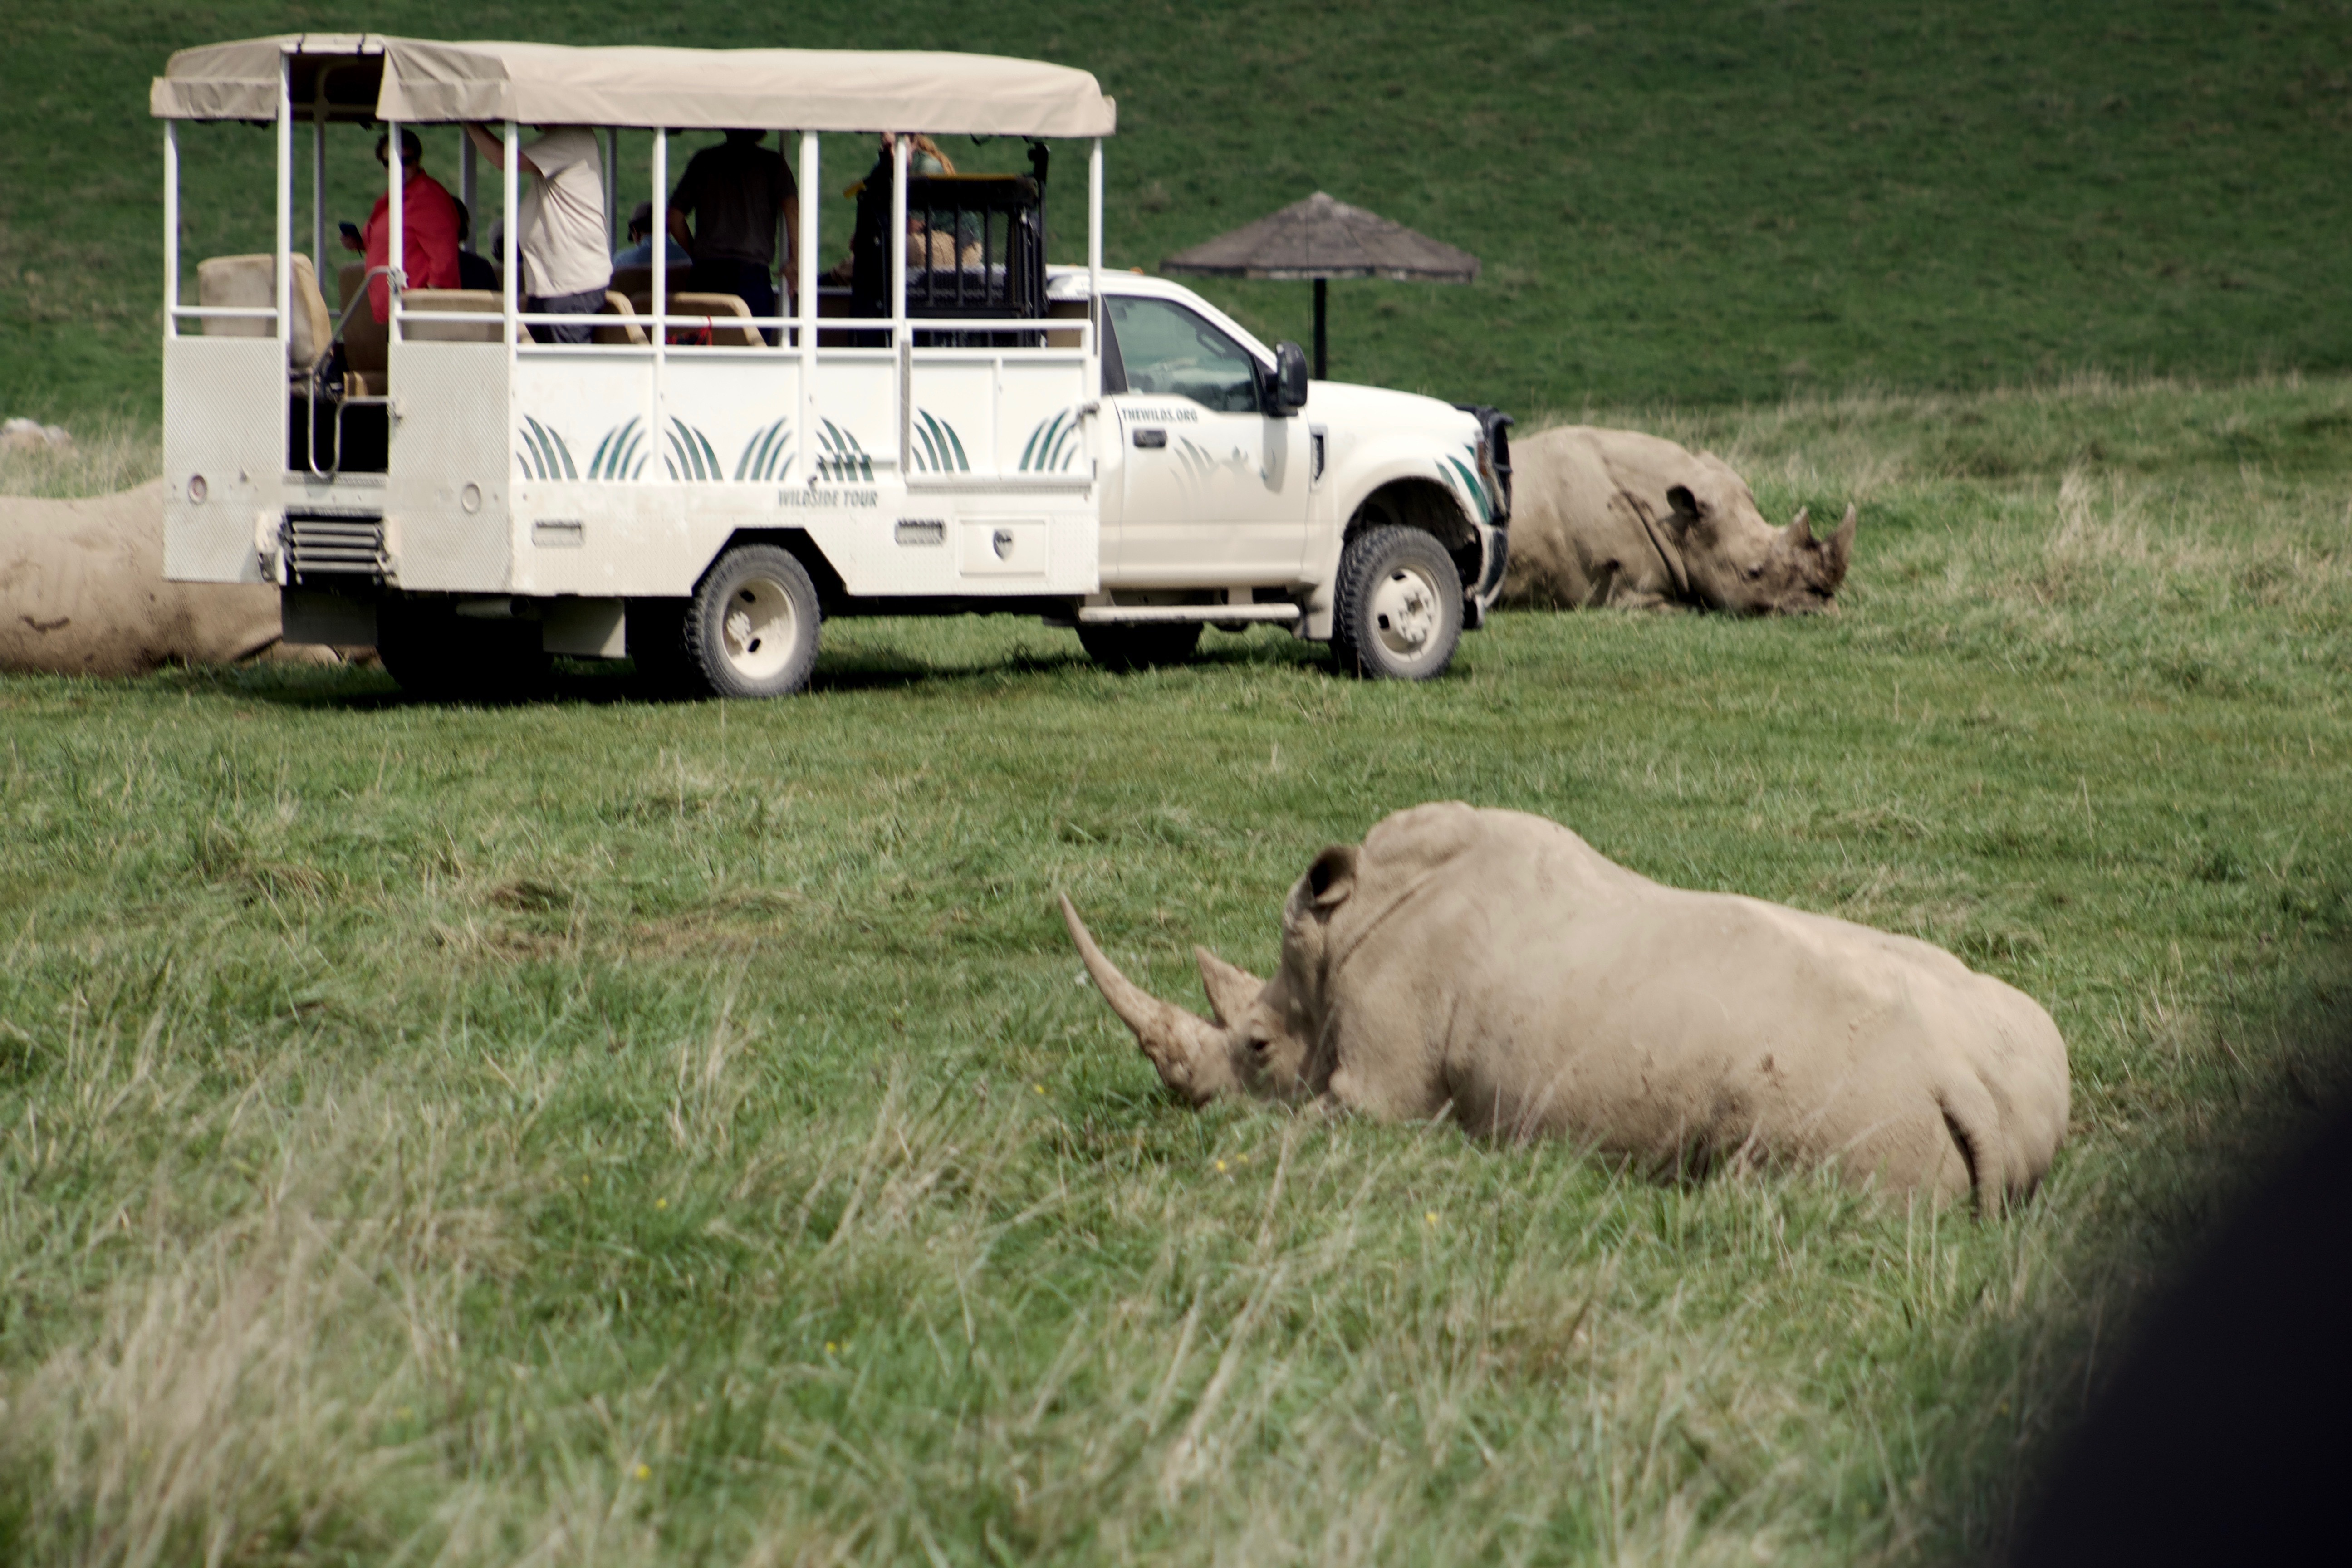 The open-air safari buses, which show the attention to detail that the Wilds has shown to providing an authentic safari tour 